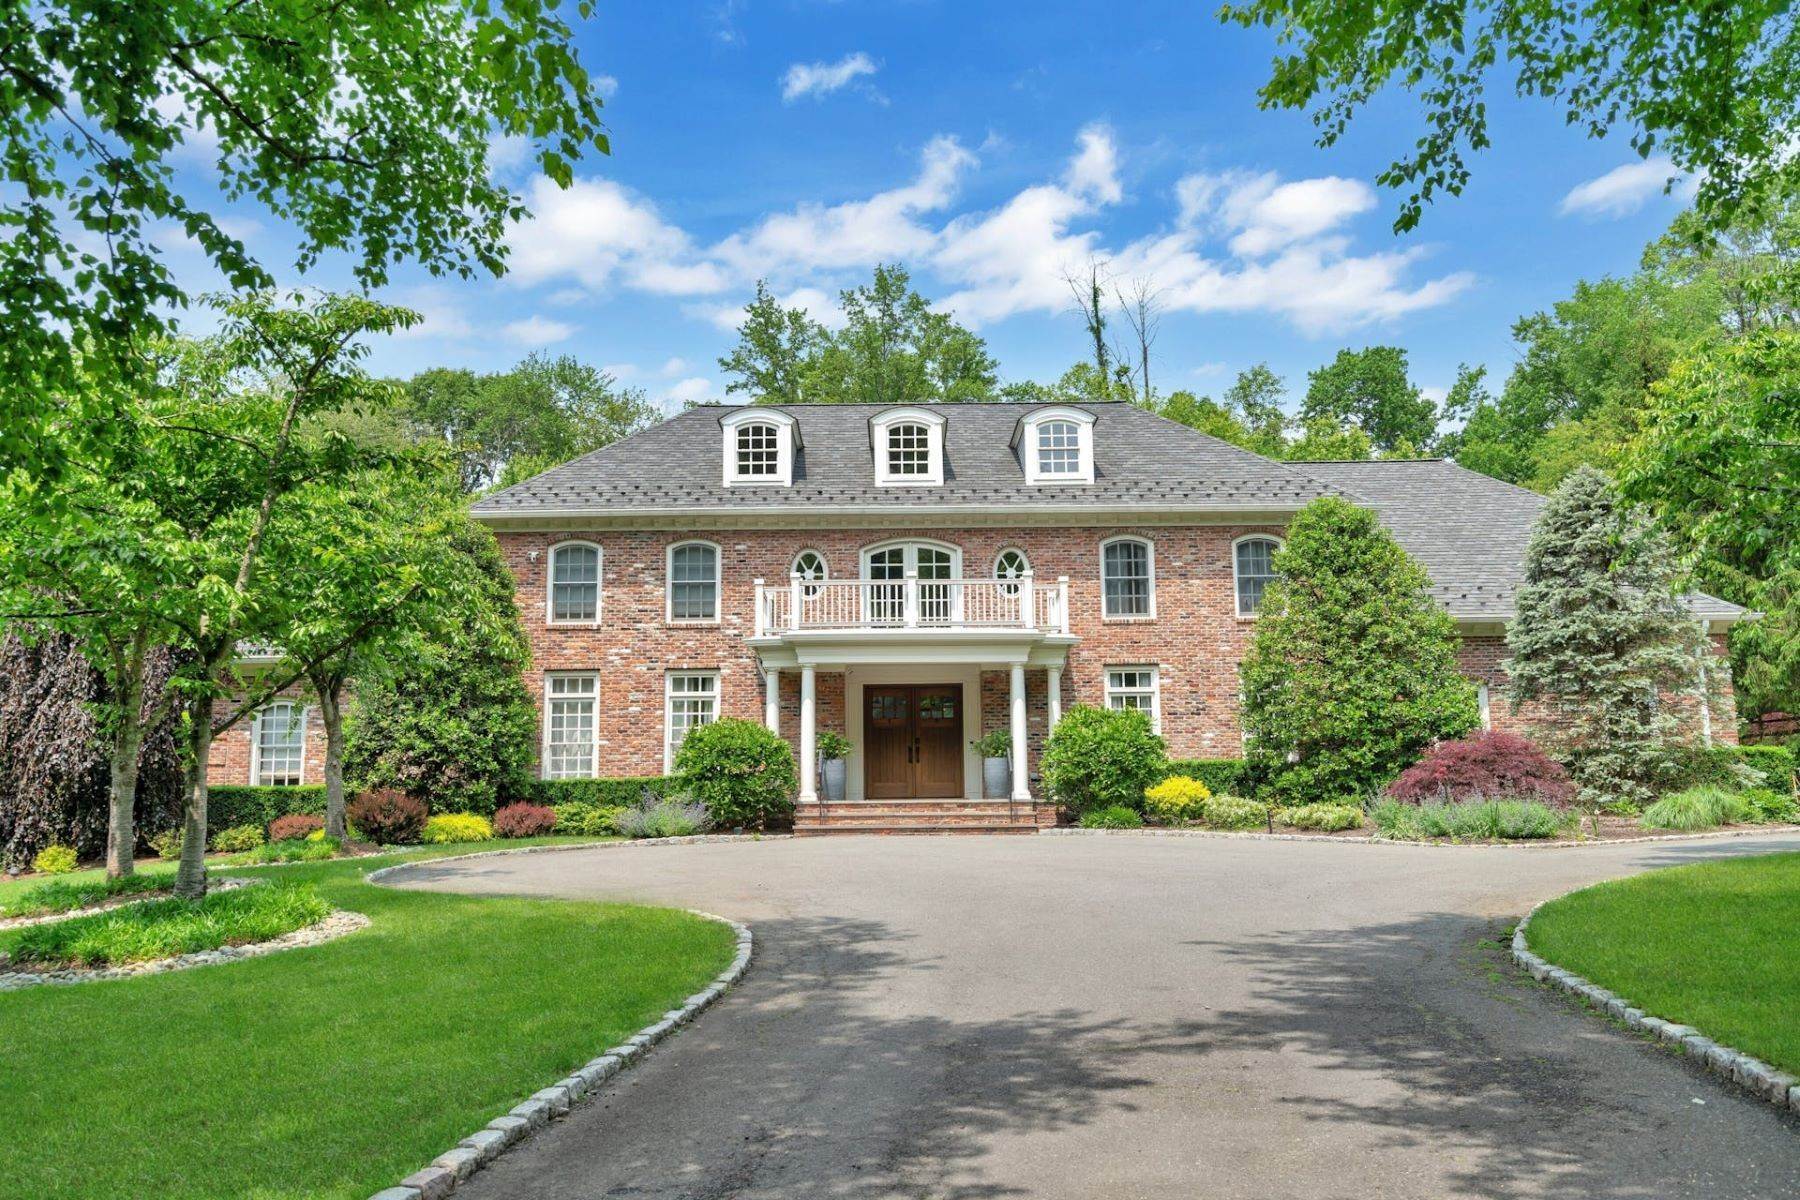 Single Family Homes for Sale at 1 Powder Hill Road, ,, NJ, 07458 1 Powder Hill Road Saddle River, New Jersey 07458 United States